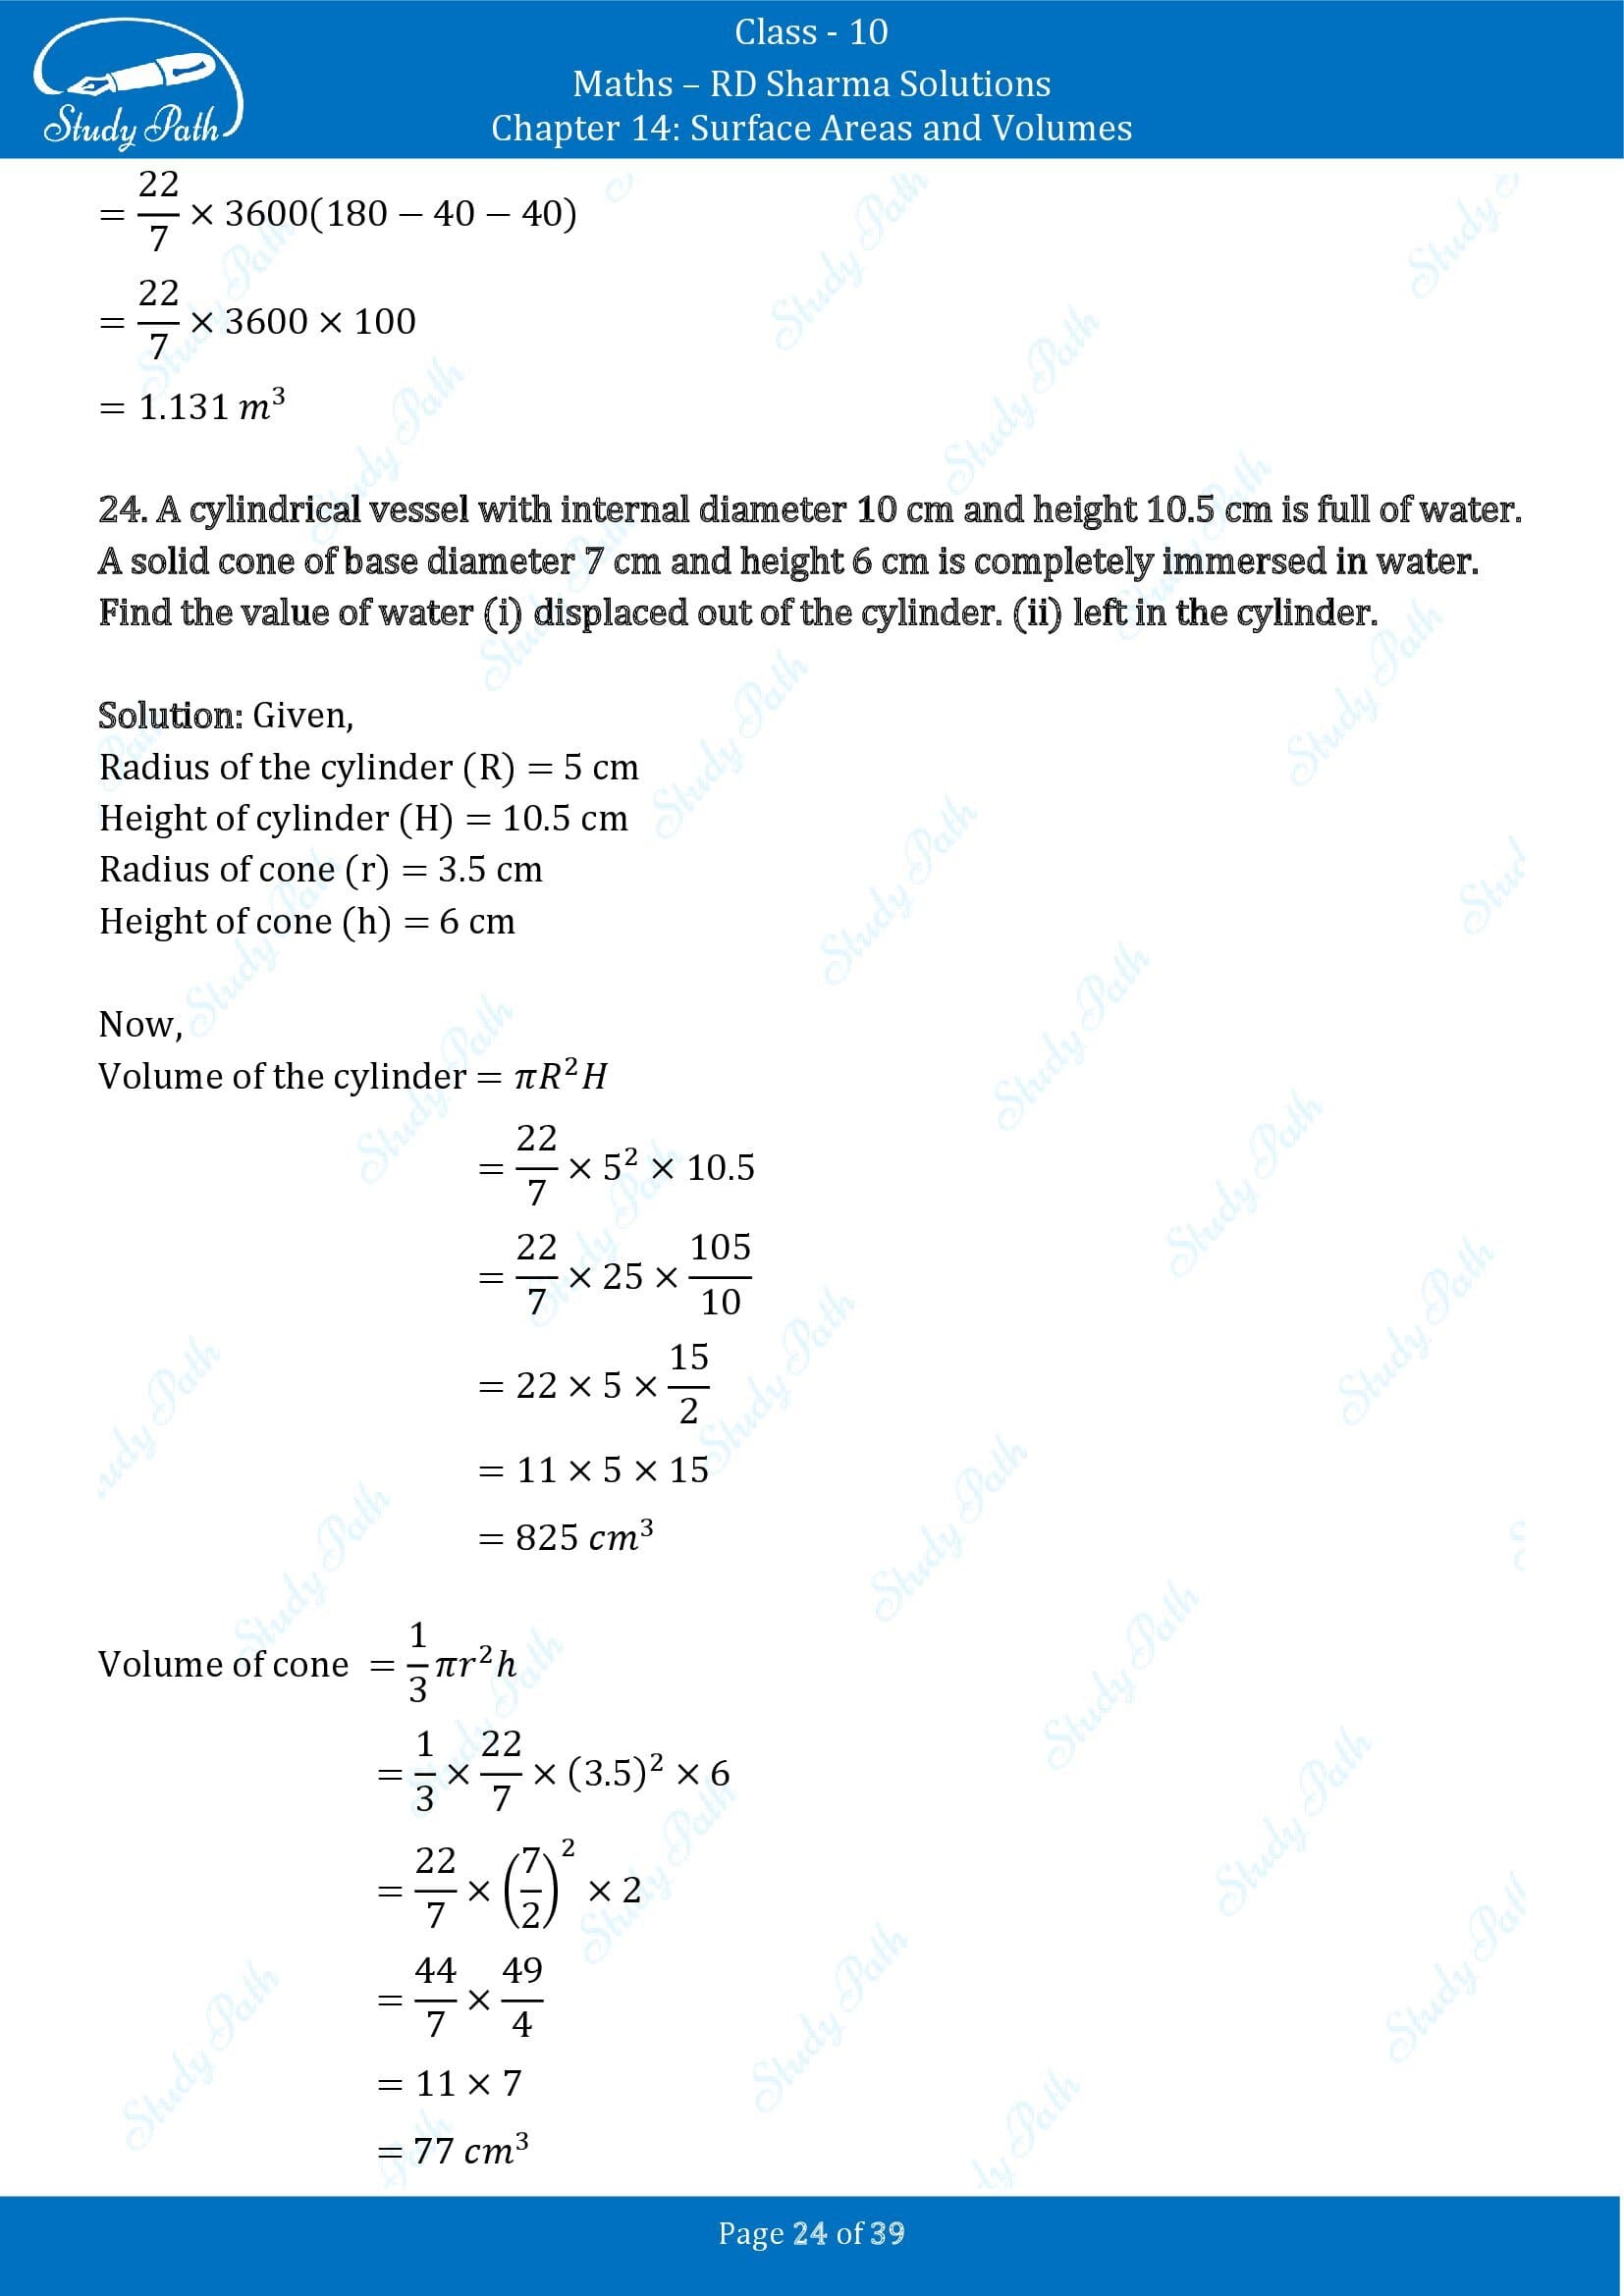 RD Sharma Solutions Class 10 Chapter 14 Surface Areas and Volumes Exercise 14.2 00024